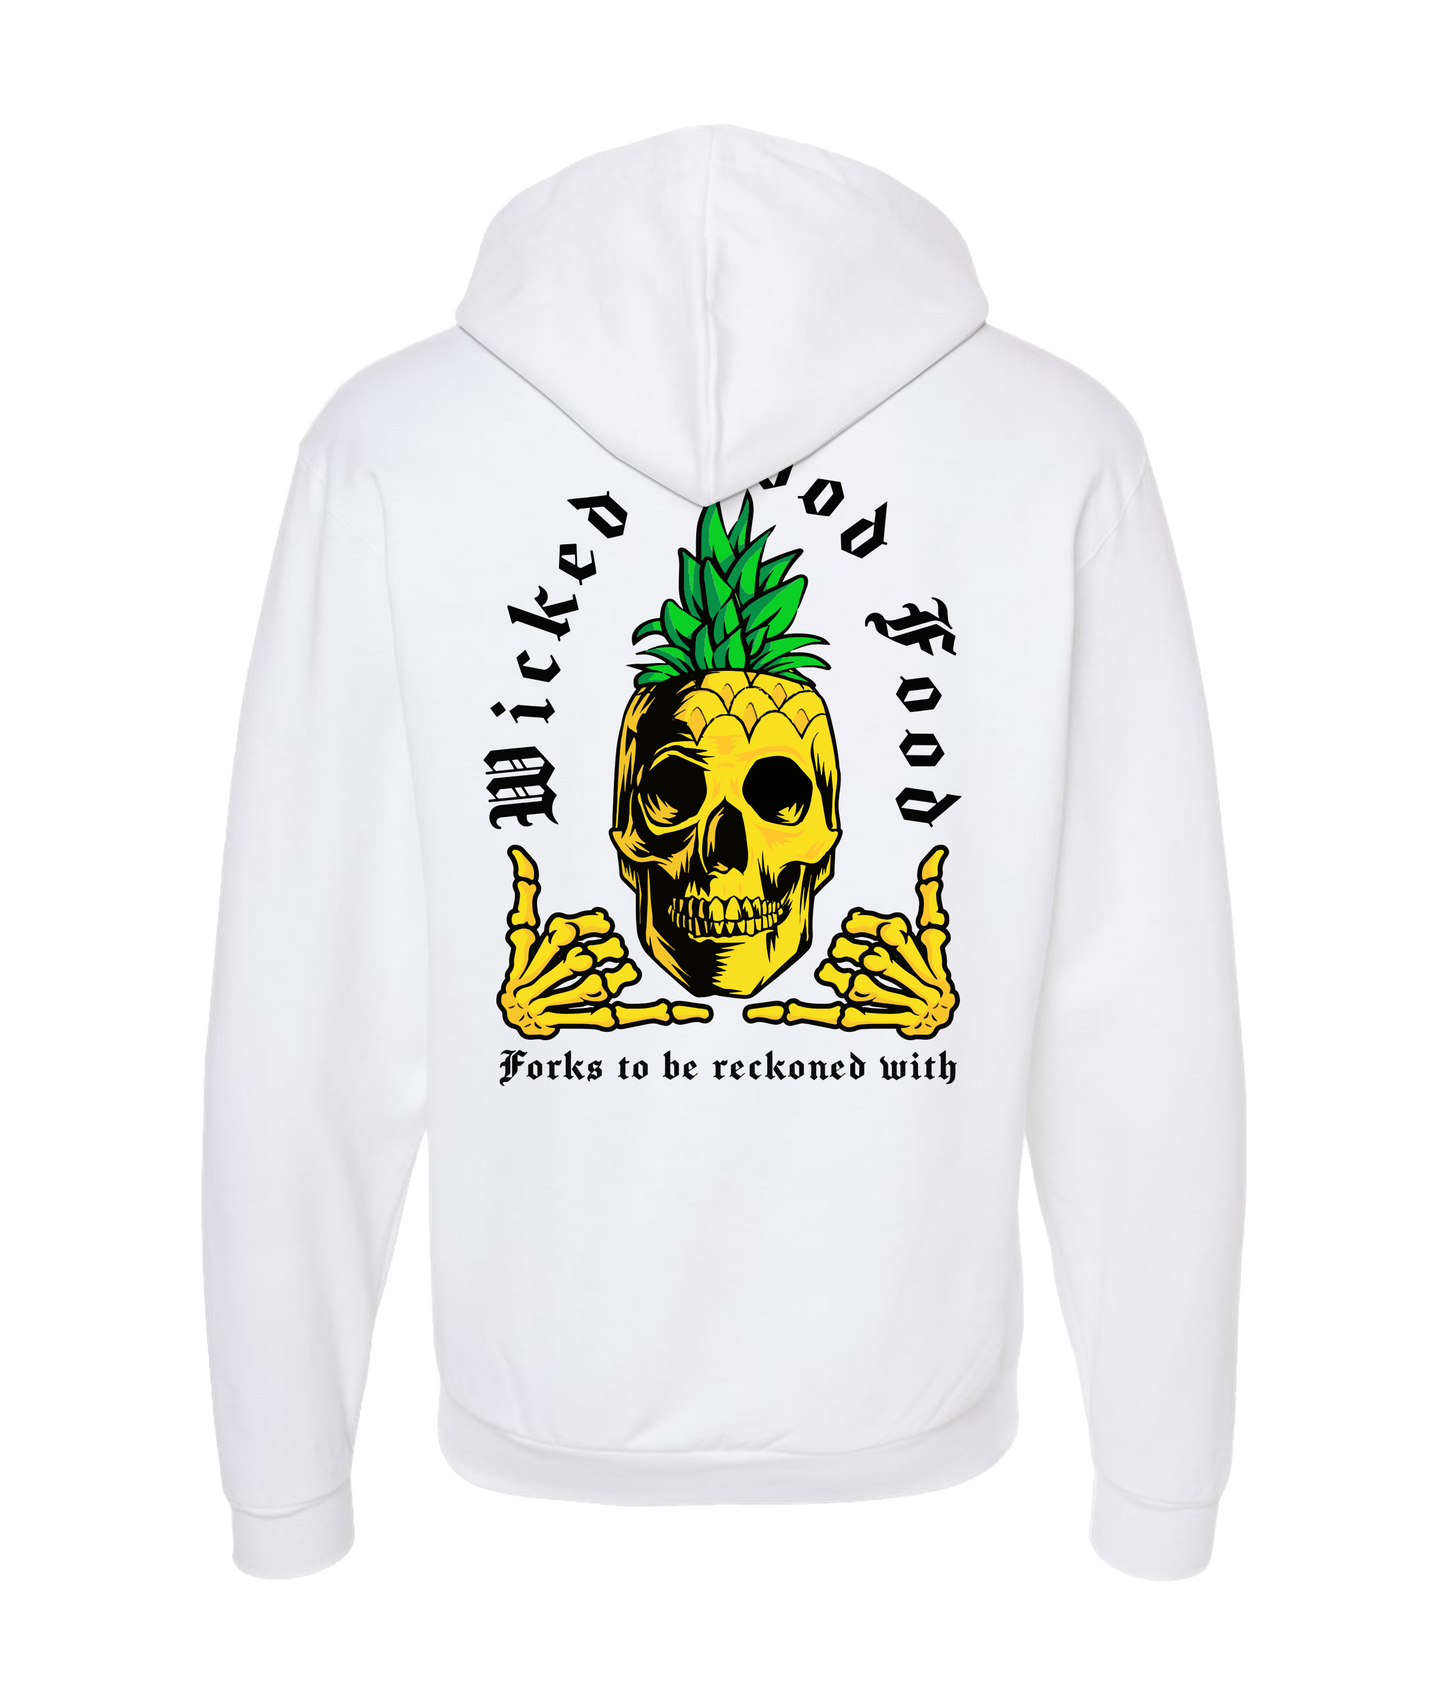 The Wicked Kitchen - Forks to be Reckoned With - White Zip Up Hoodie